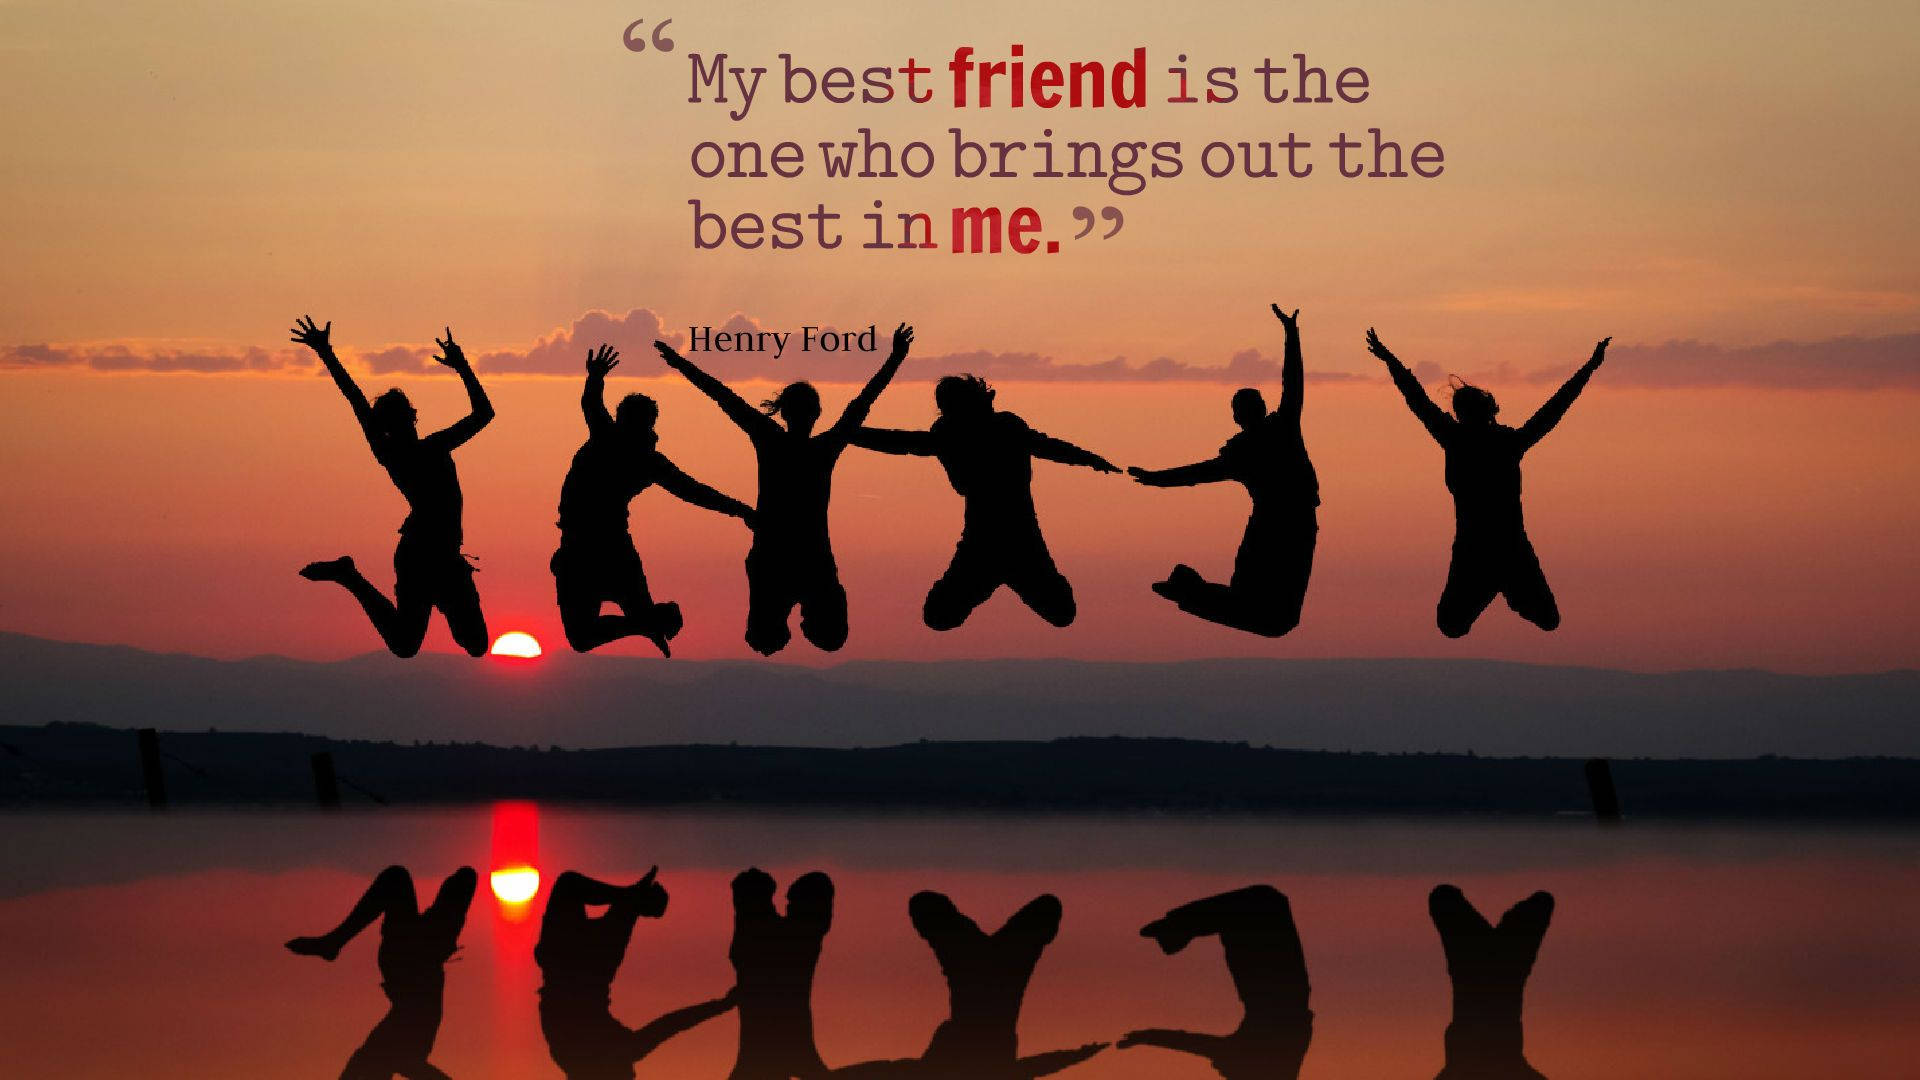 Best In Me Friendship Quotes